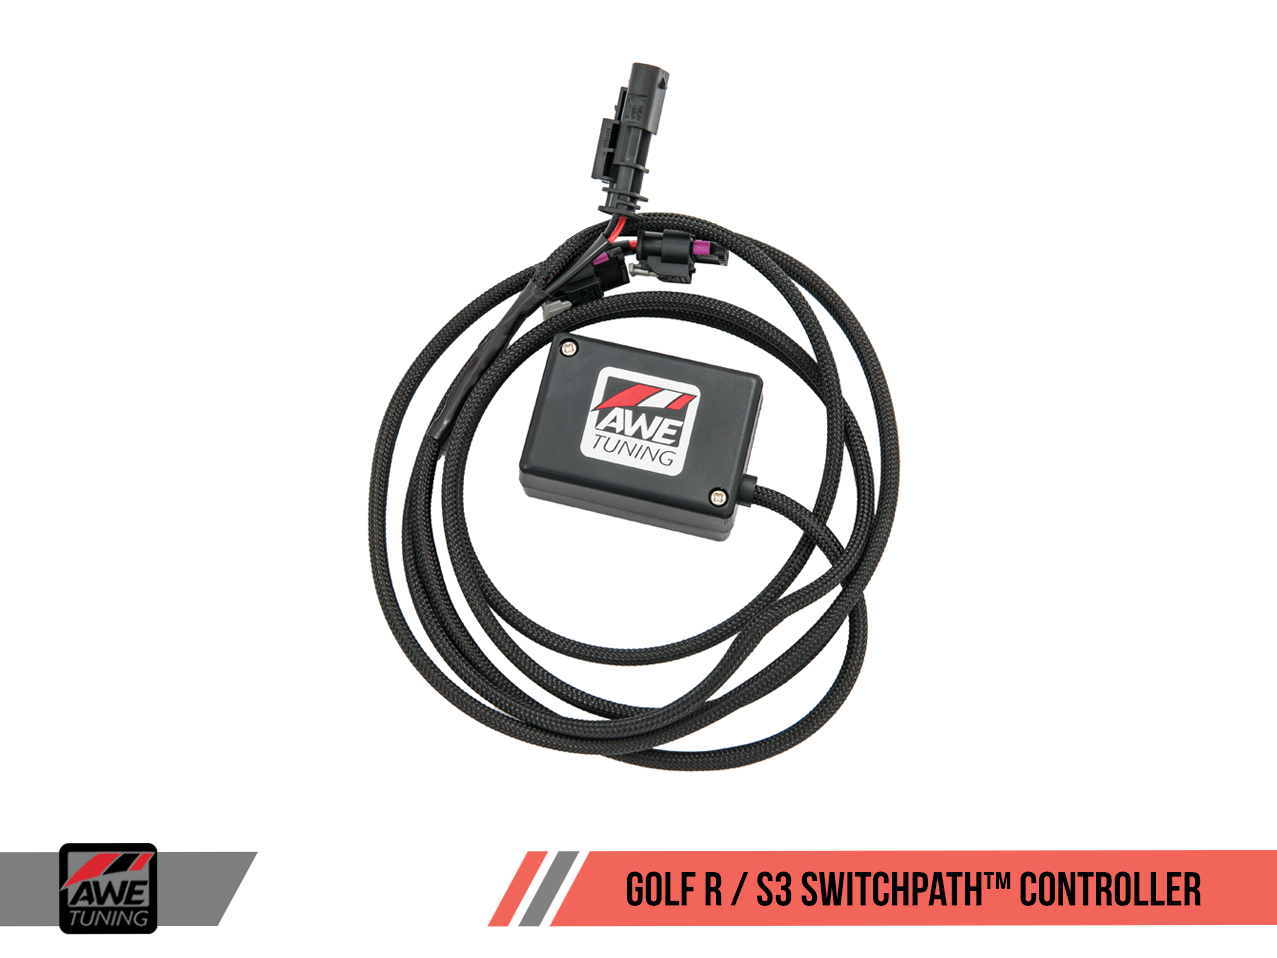 switchpath controller 2 Awesome GTI Reveals Details Of AWE Tunings Push Button SwitchPath Remote Exhaust Control System